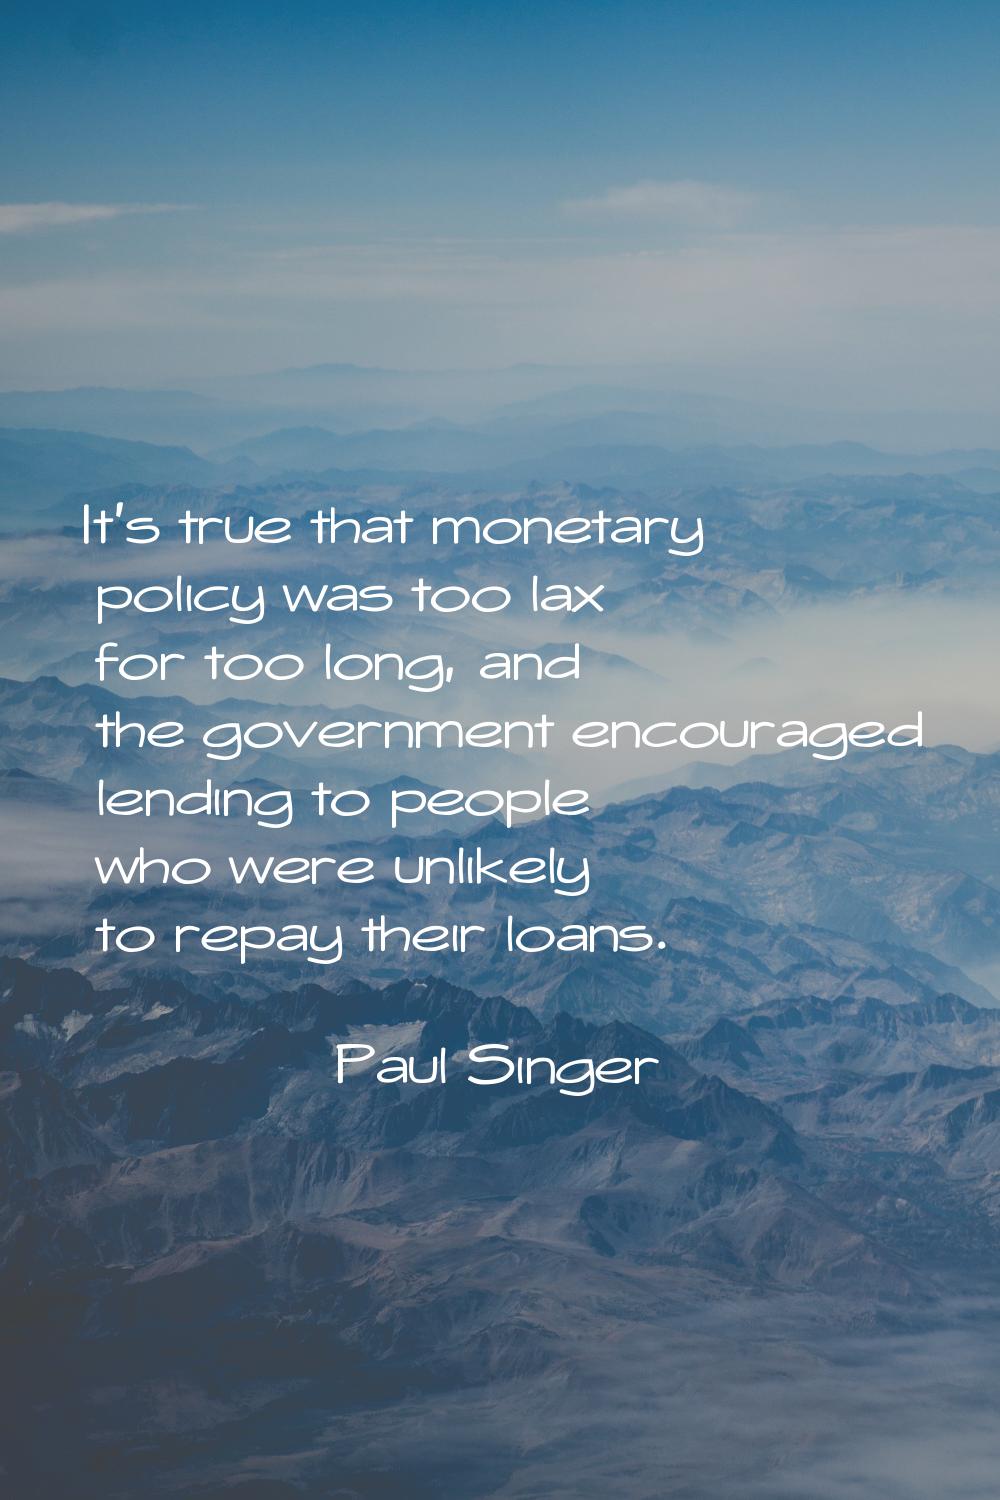 It's true that monetary policy was too lax for too long, and the government encouraged lending to p